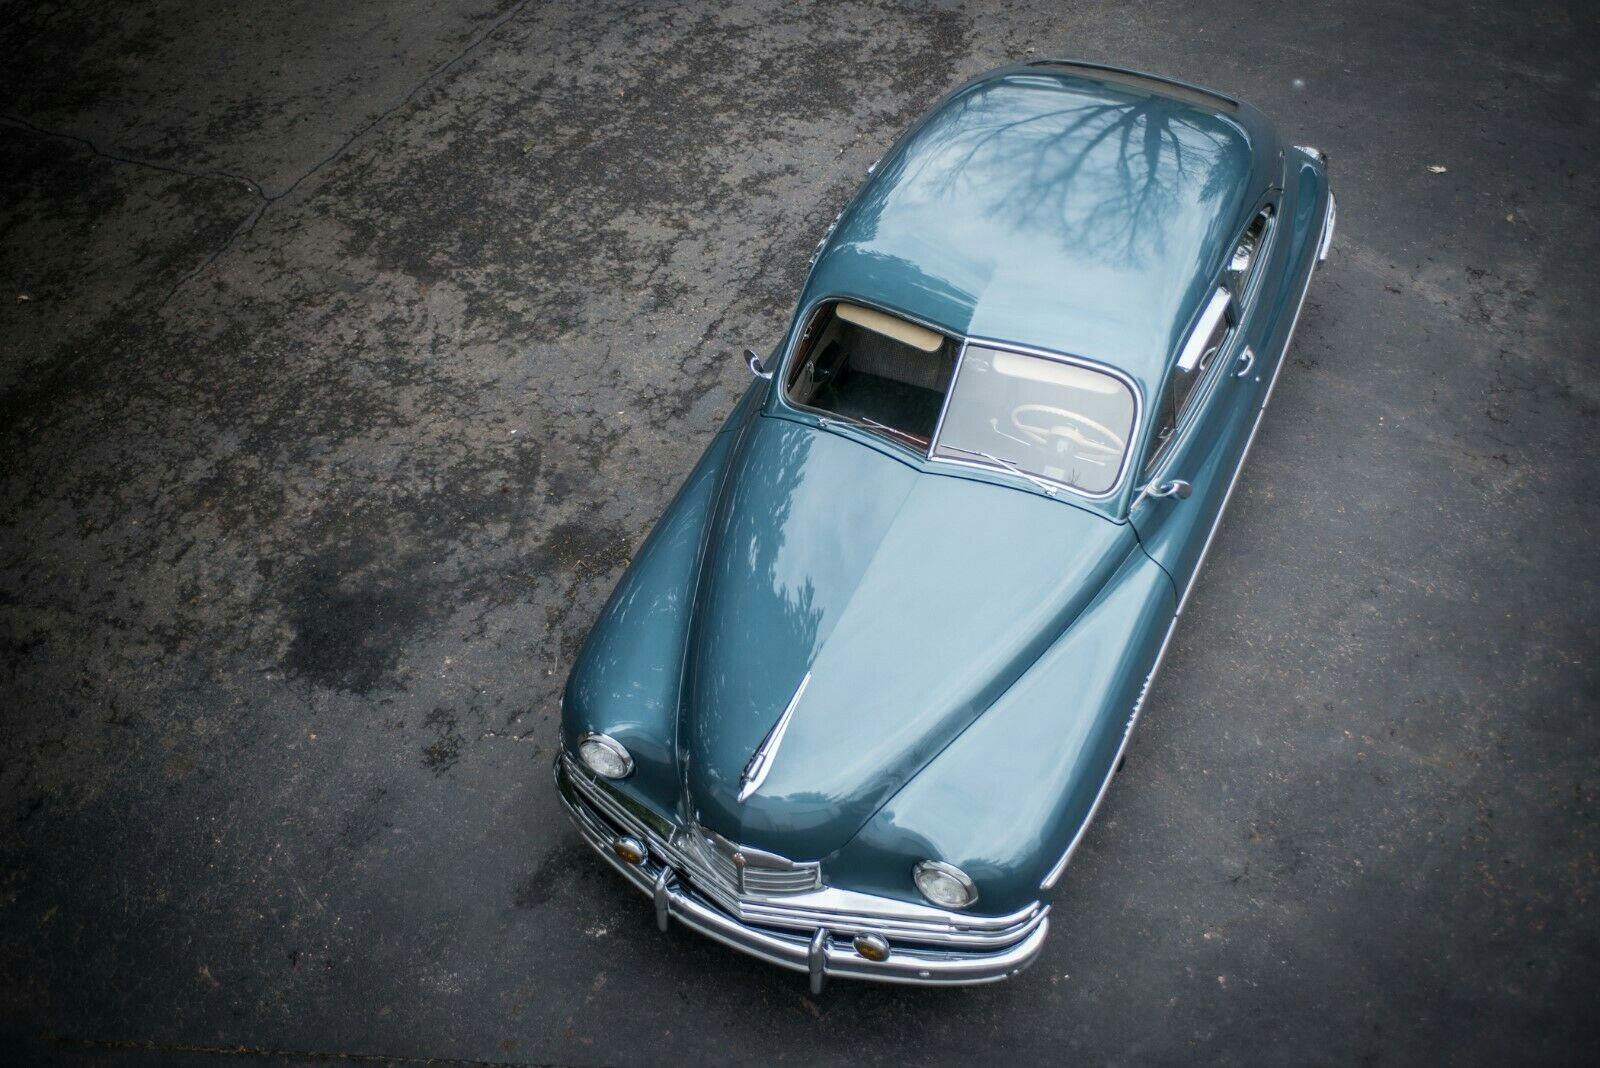 1949 Packard Deluxe Club Sedan - From Above